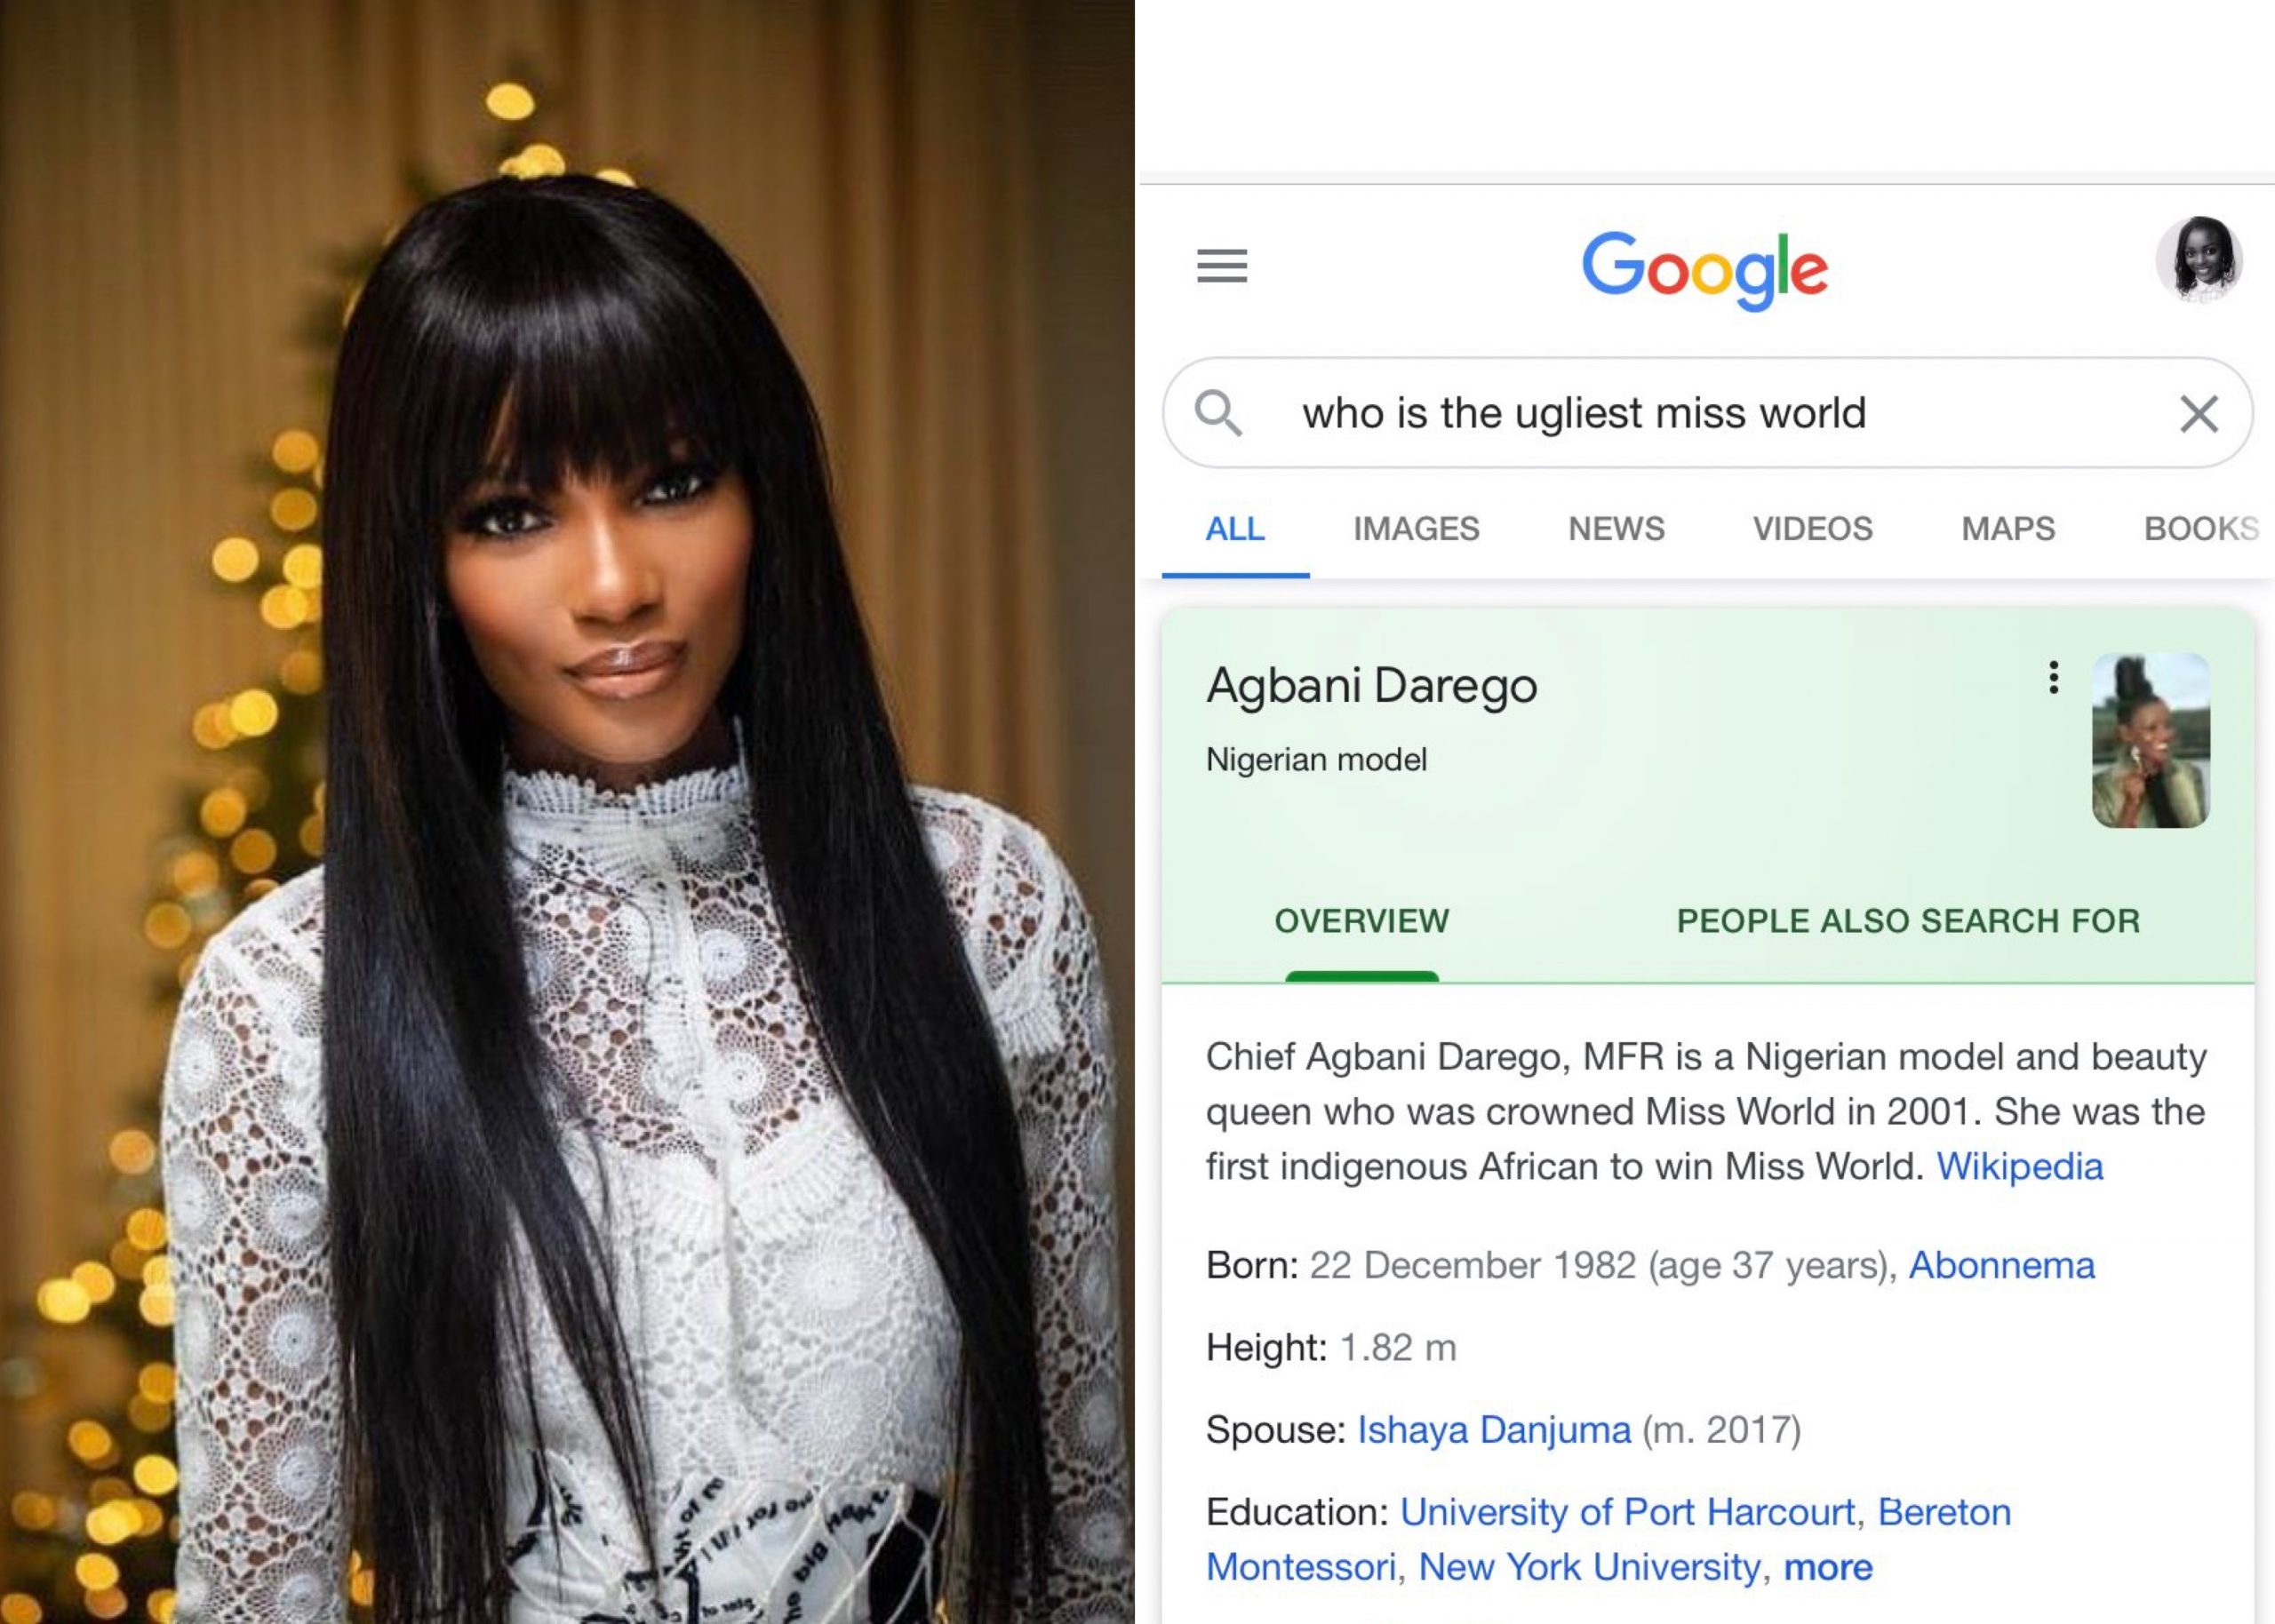 Nigerians Express Anger As Google Lists Agbani Darego As ‘Ugliest Miss World Ever’